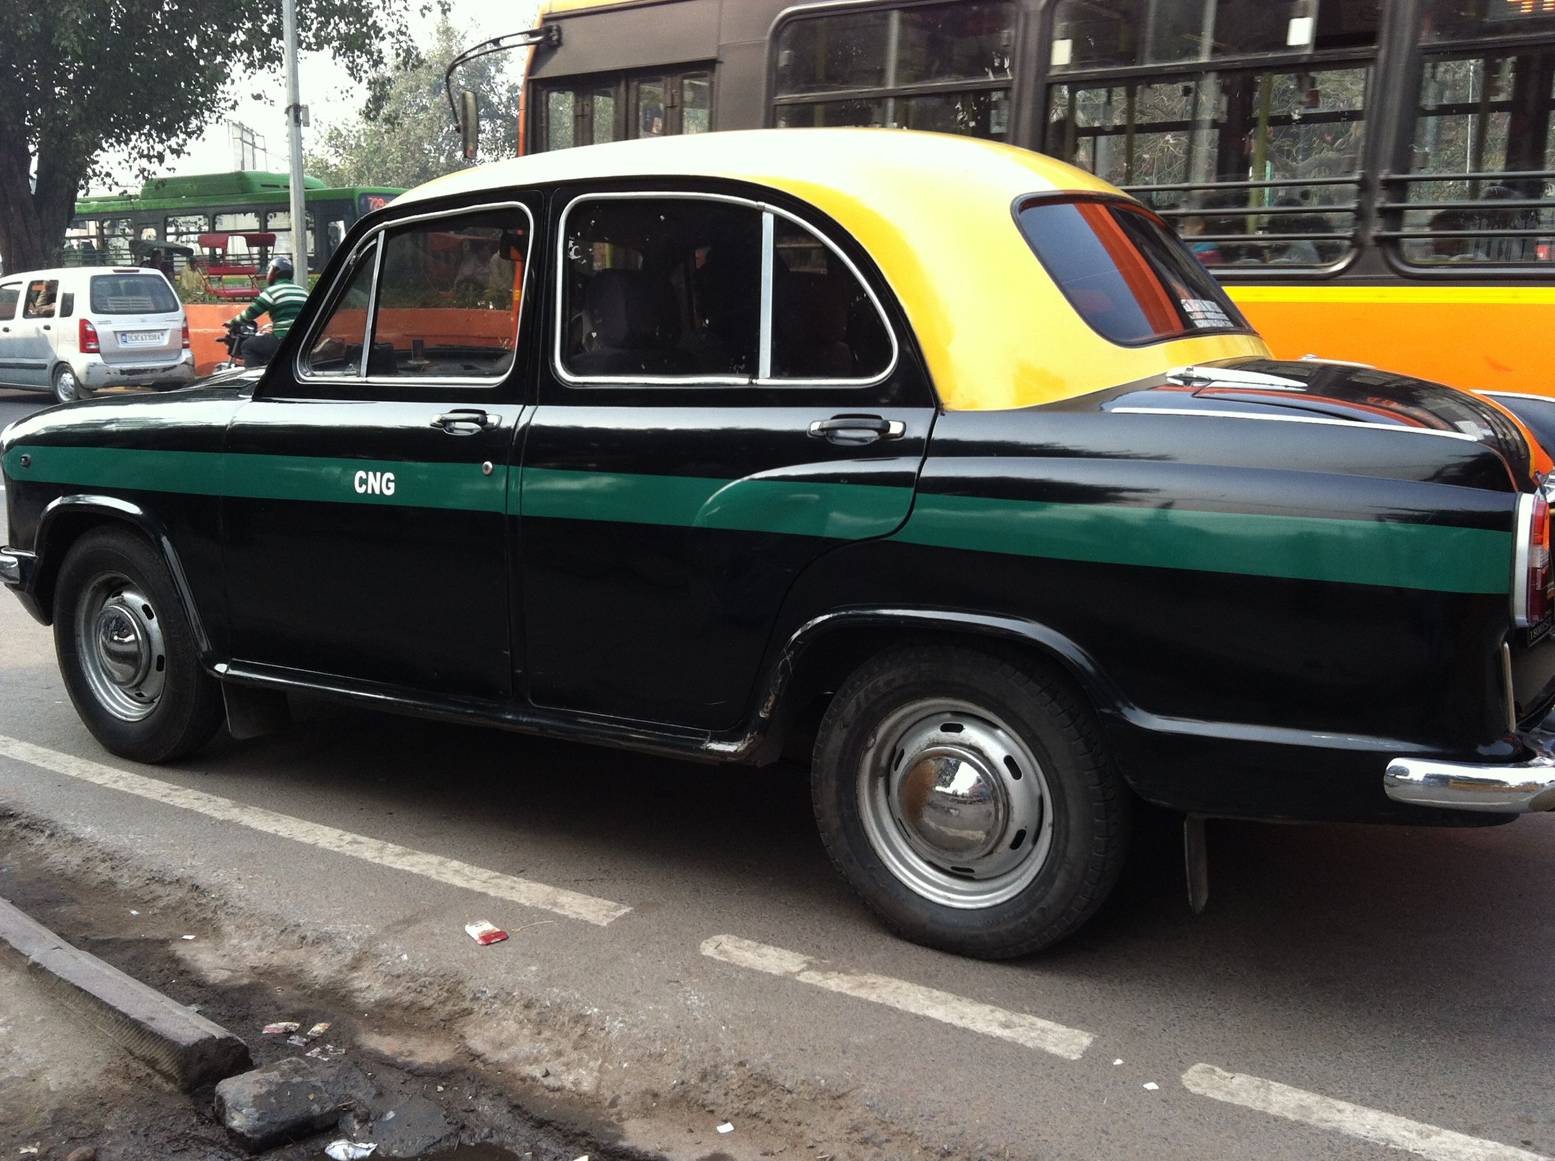 Typical carriage-type taxicab in New Delhi.